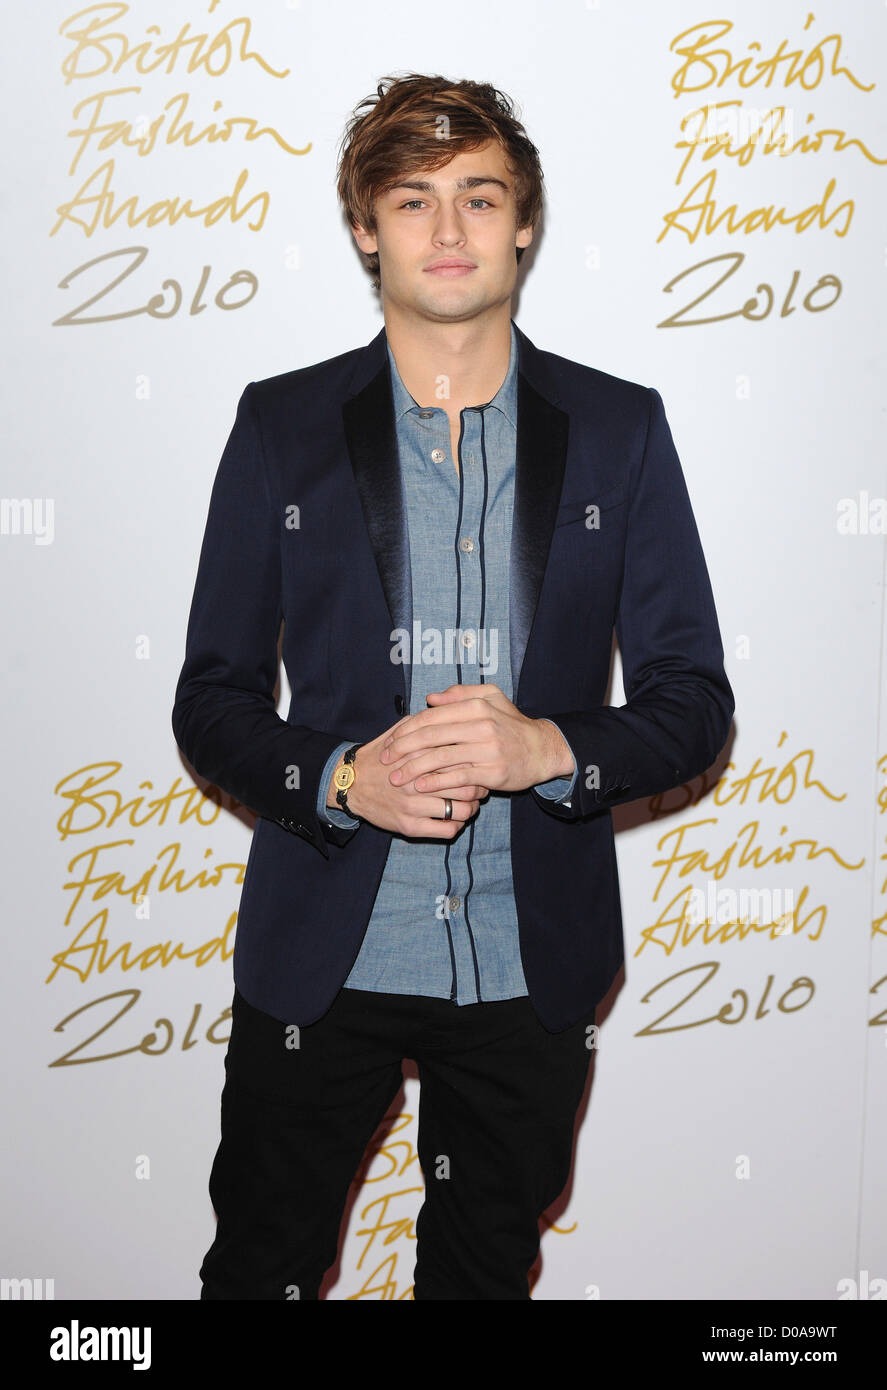 Douglas Booth The British Fashion Awards held at the Savoy - Arrivals. London, England - 7.12.10 Stock Photo